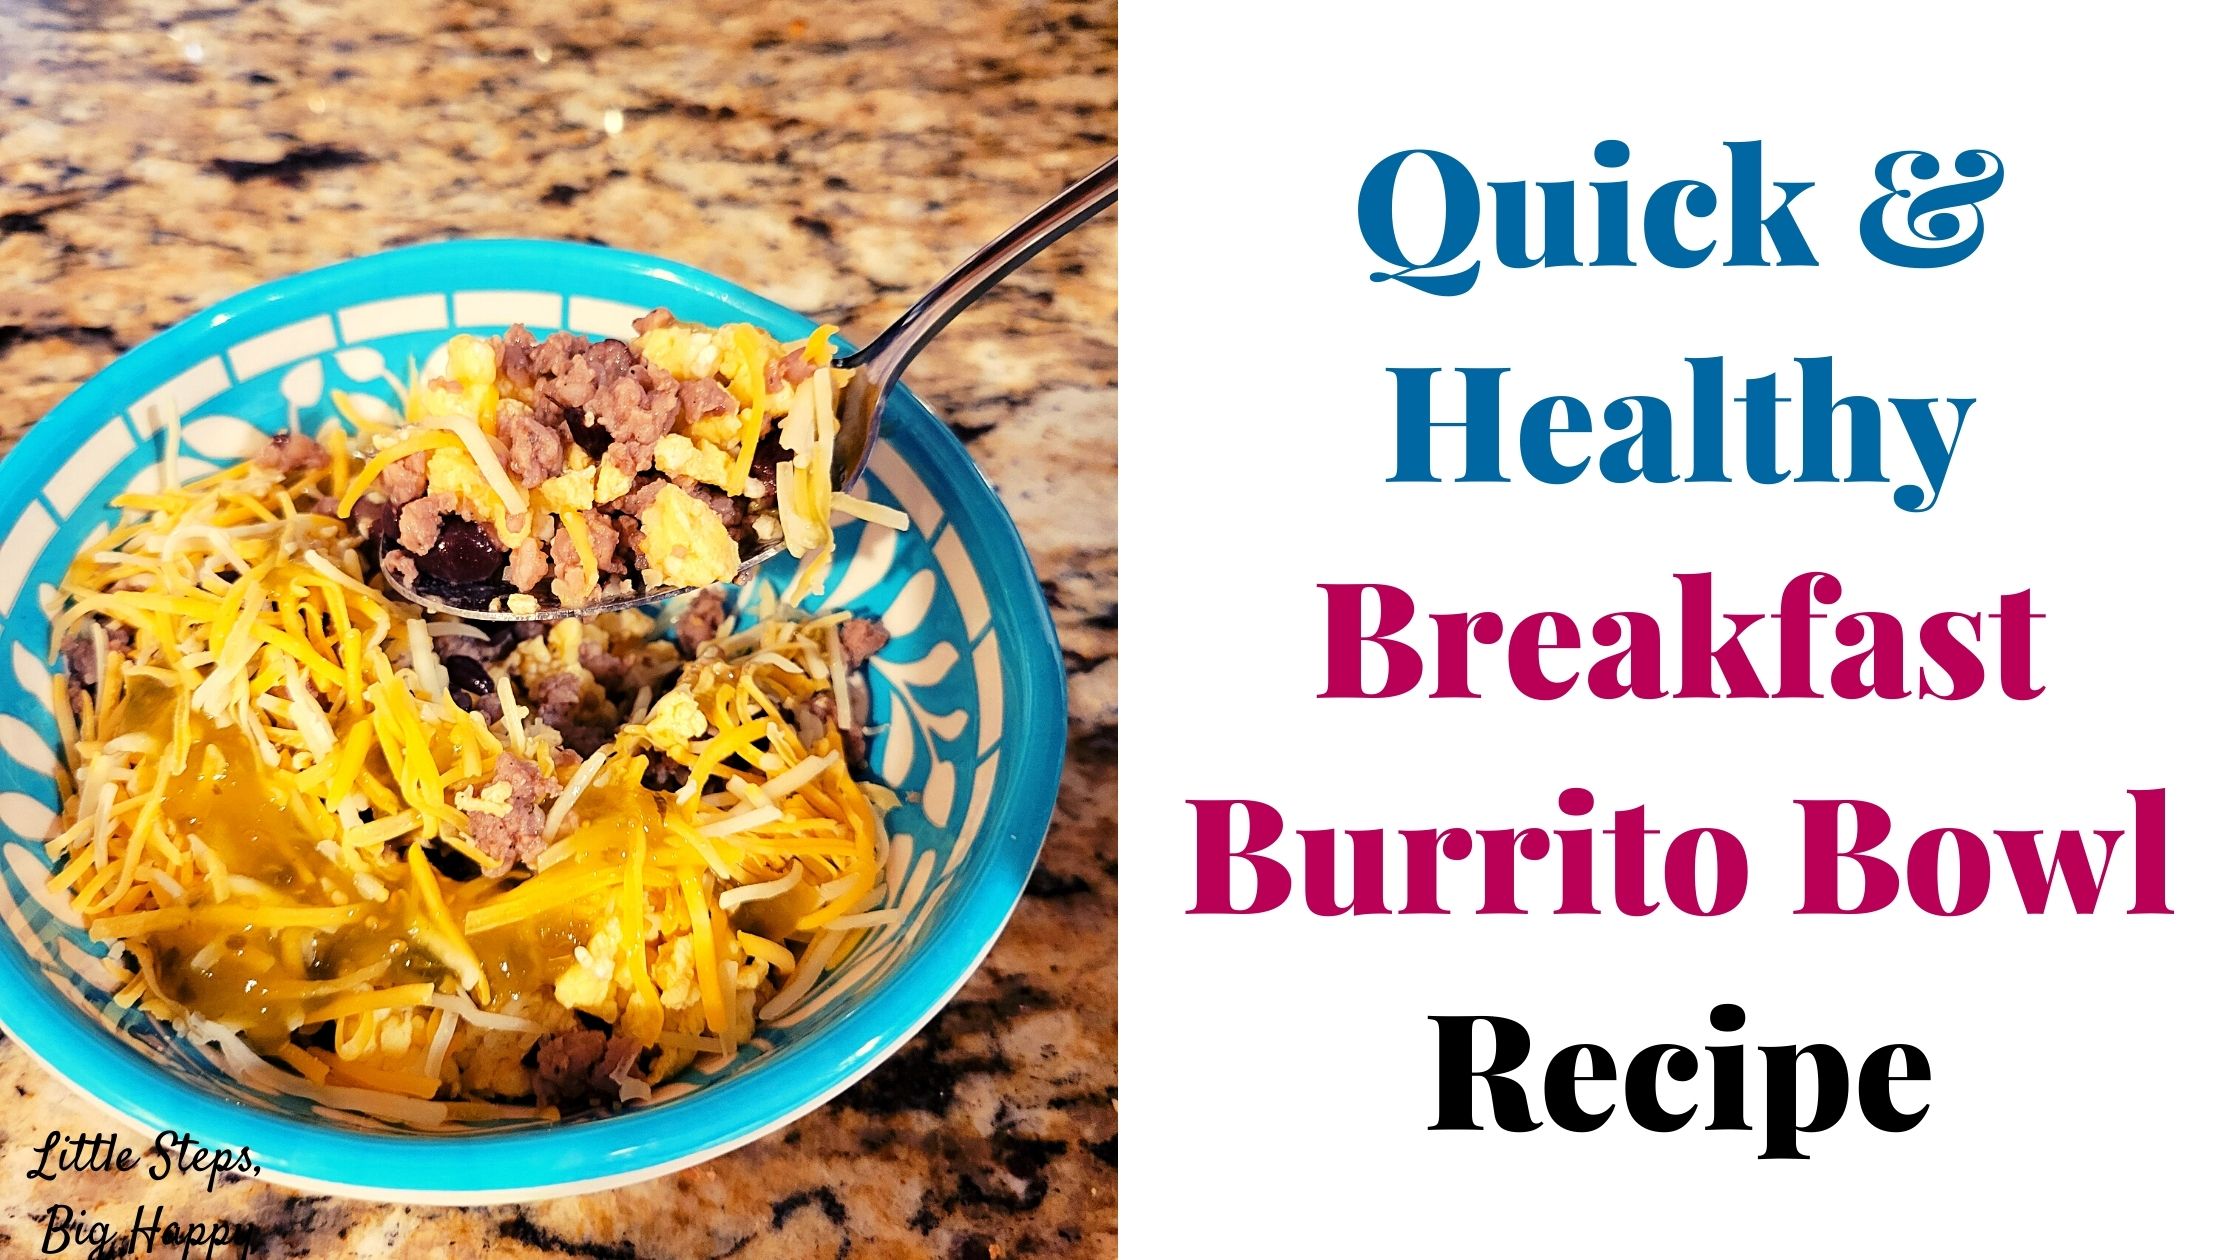 Breakfast burrito bowl. Text says: Quick & Healthy Breakfast Burrito Bowl Recipe